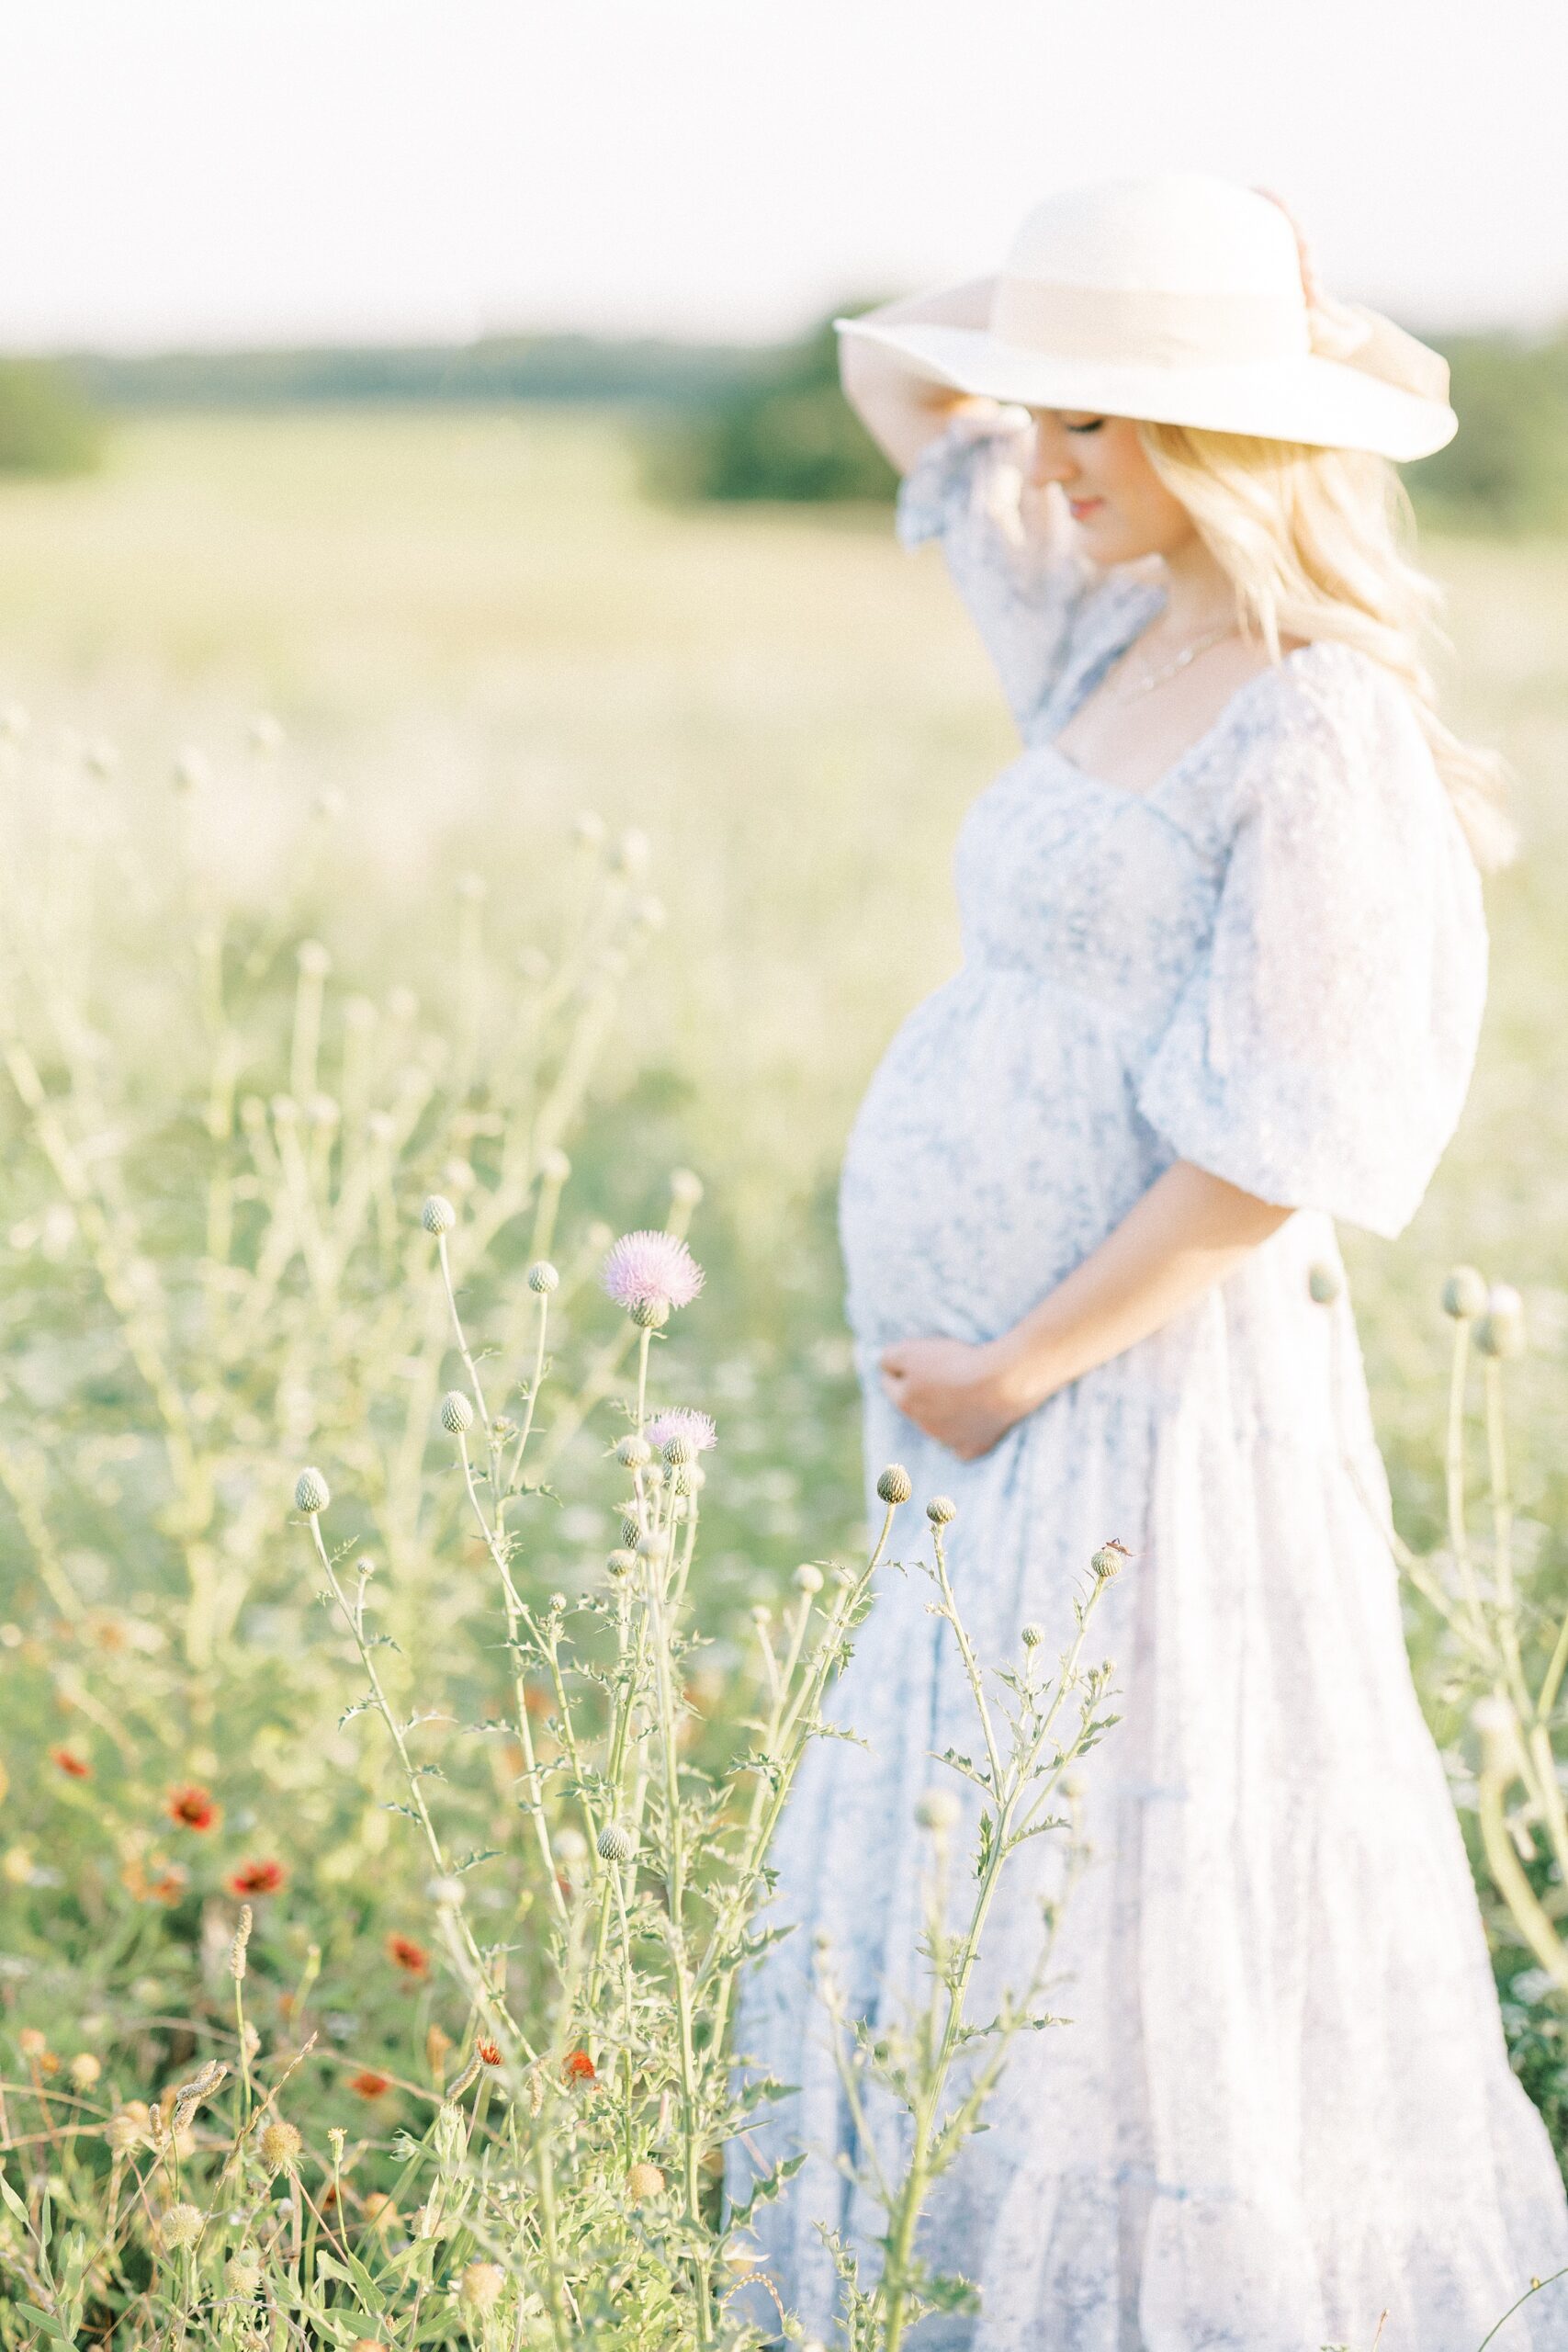 A mother to be walks through a field of wildflowers holding her bump and hat in a blue floral dress after using Dallas Fertility Clinics